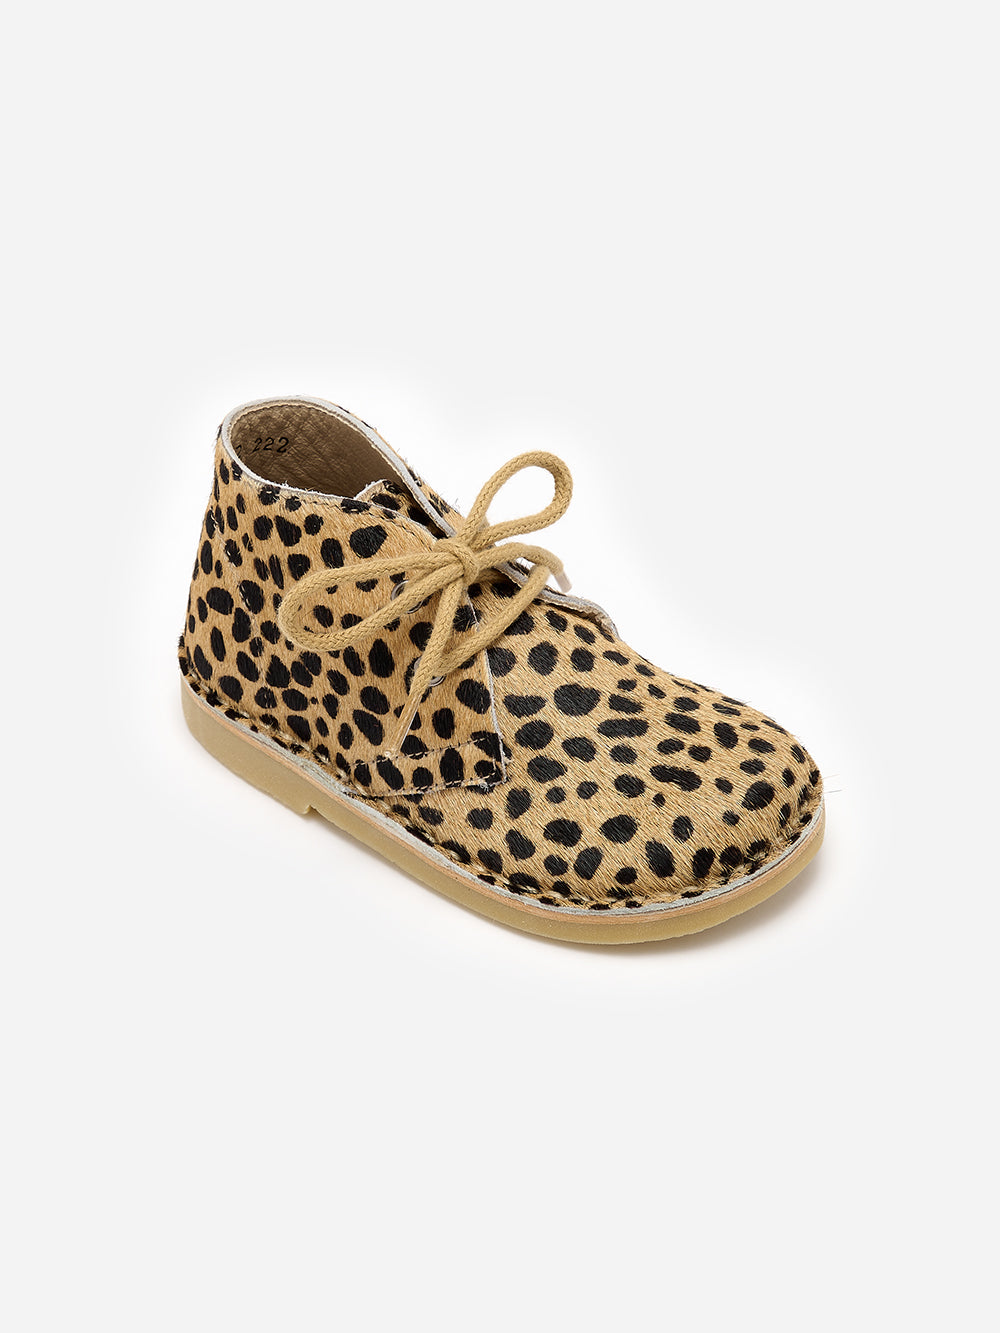 Cheetah Pony Leather Kids Lace Up Boots